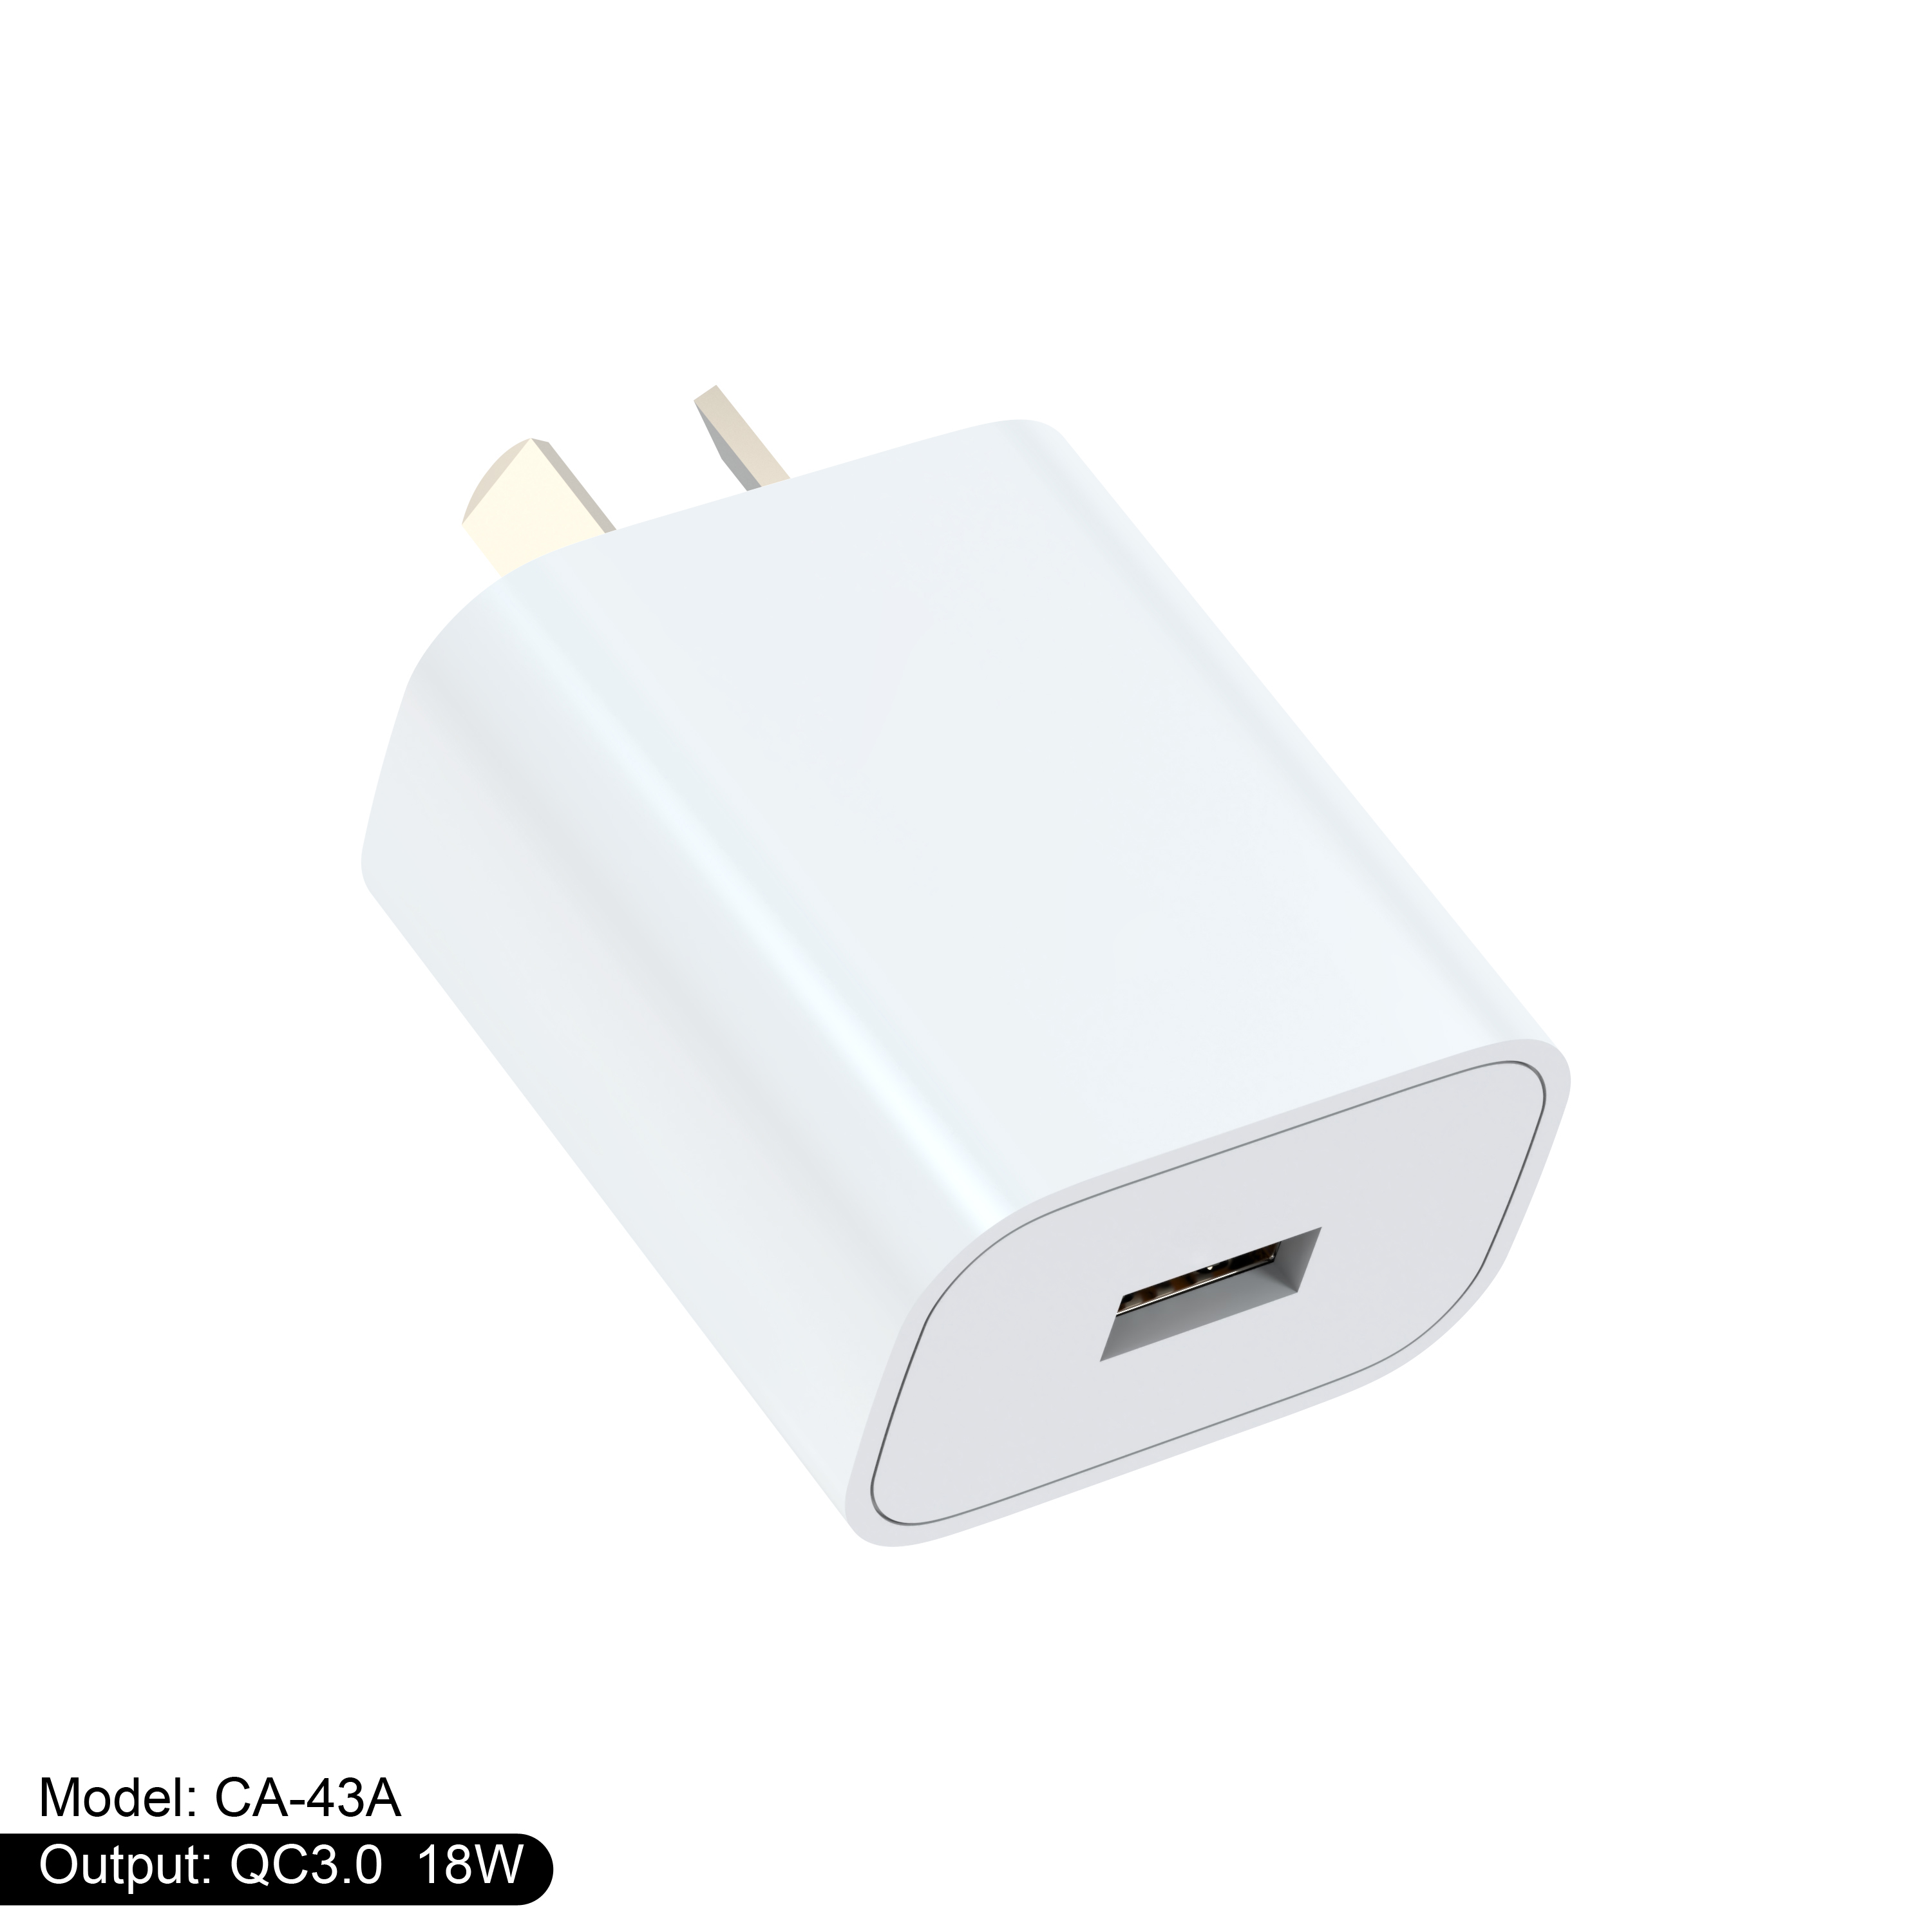 18W USB wall charger QC 3.0 fast charging